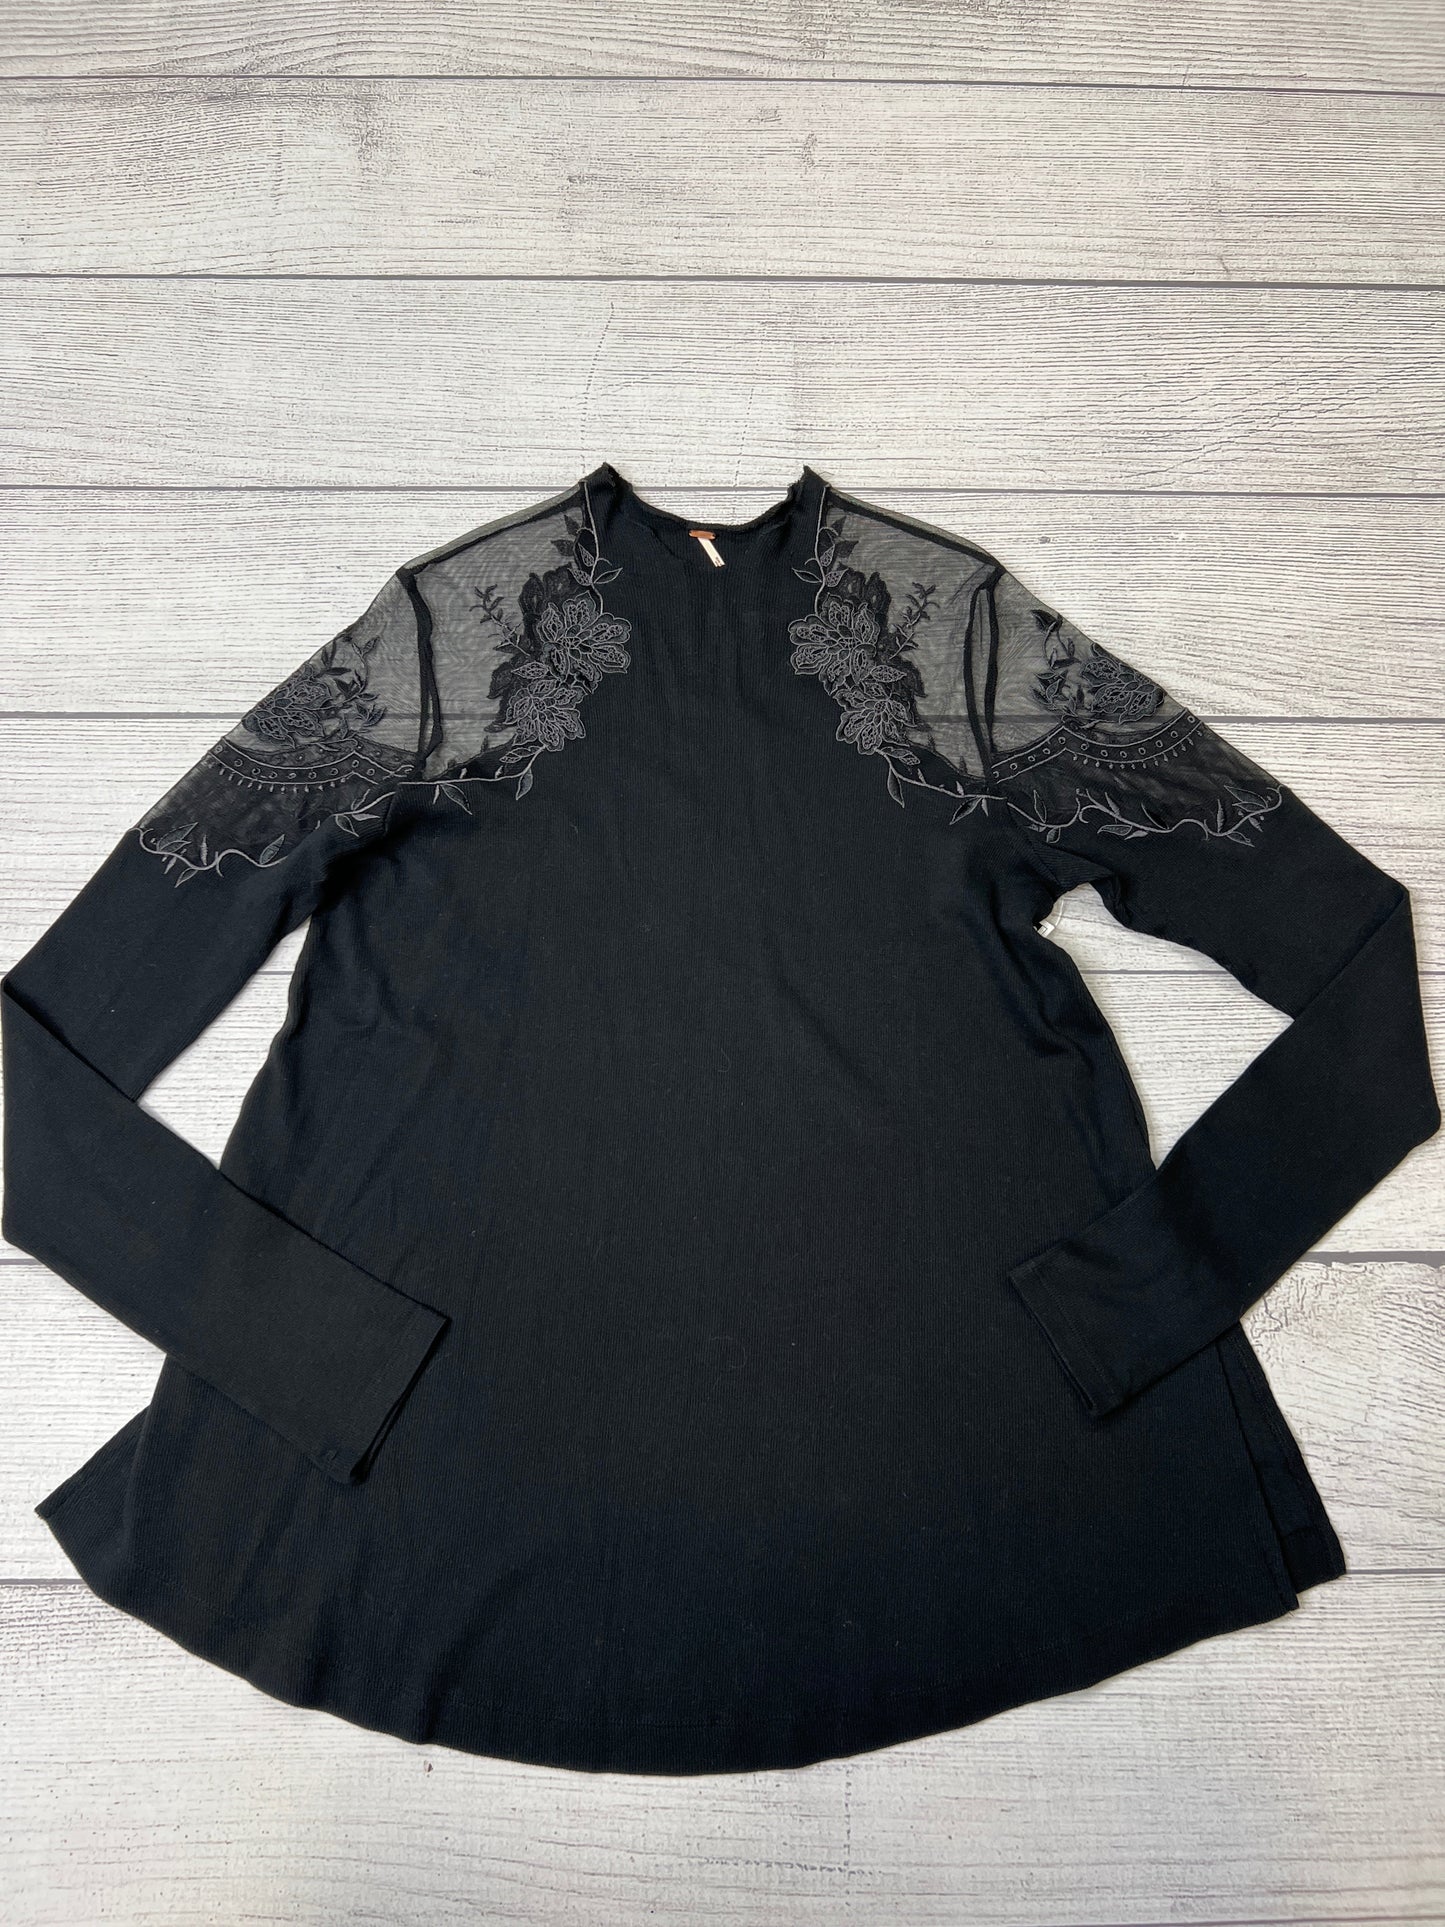 Black Top Long Sleeve Free People, Size L